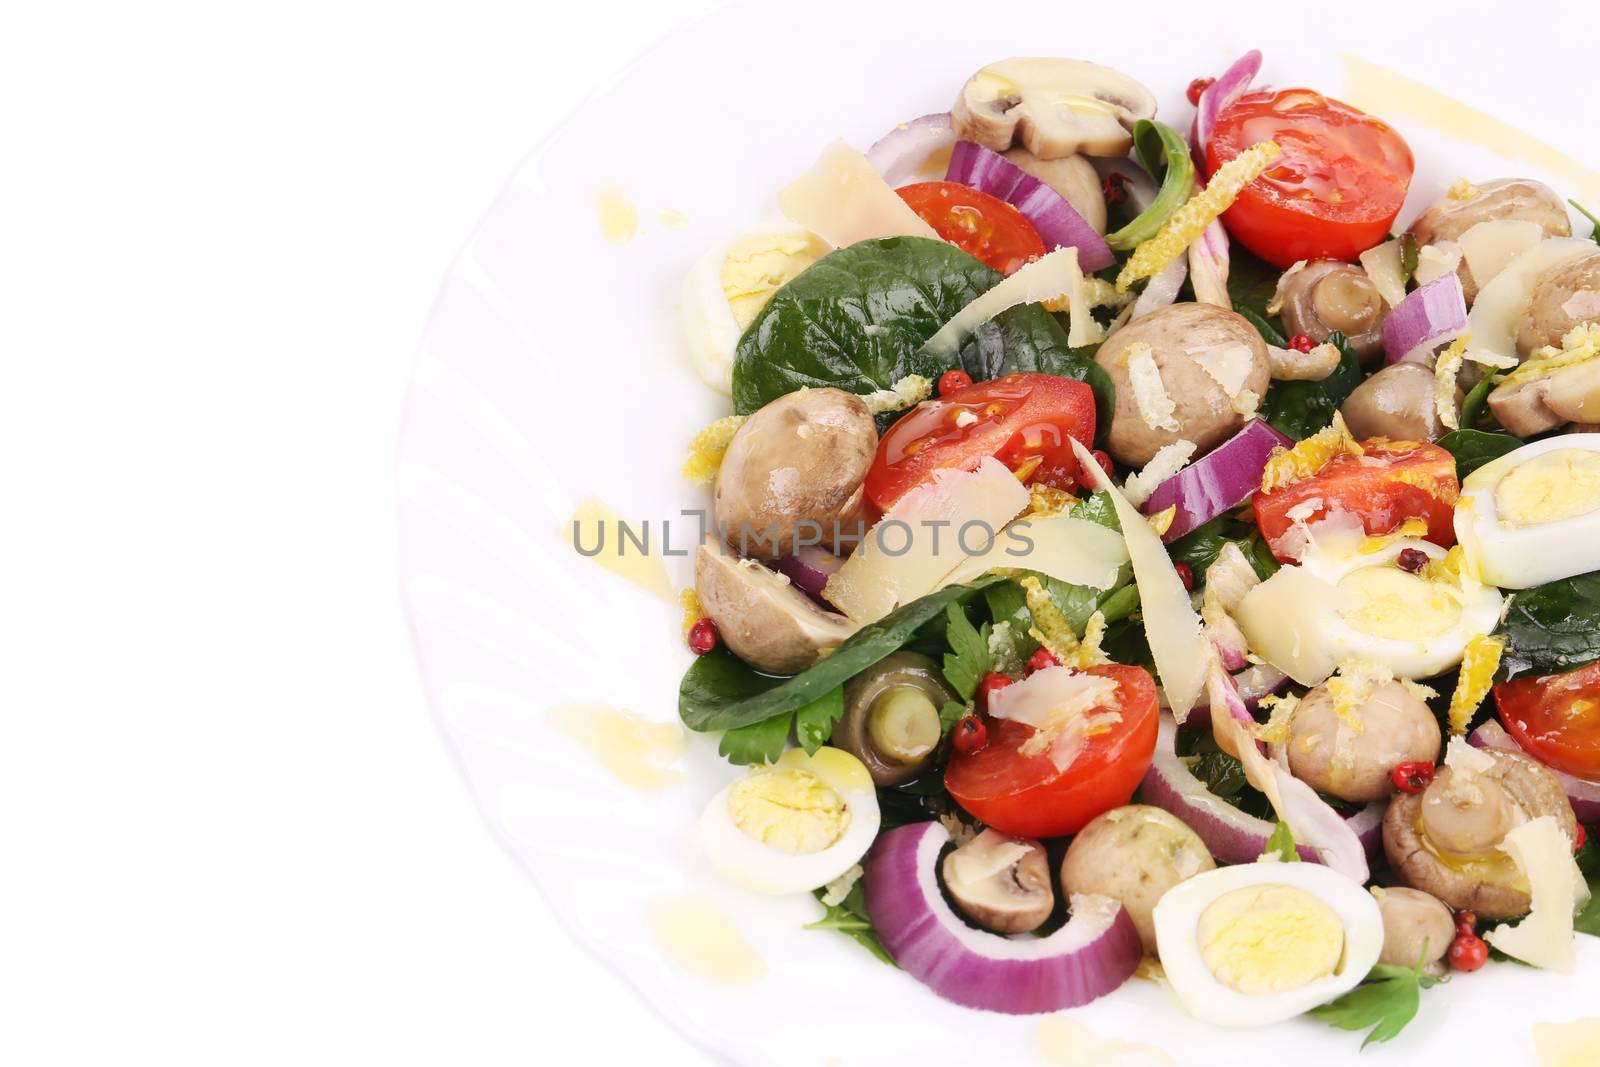 Mushroom salad with tomatoes and quail eggs. by indigolotos